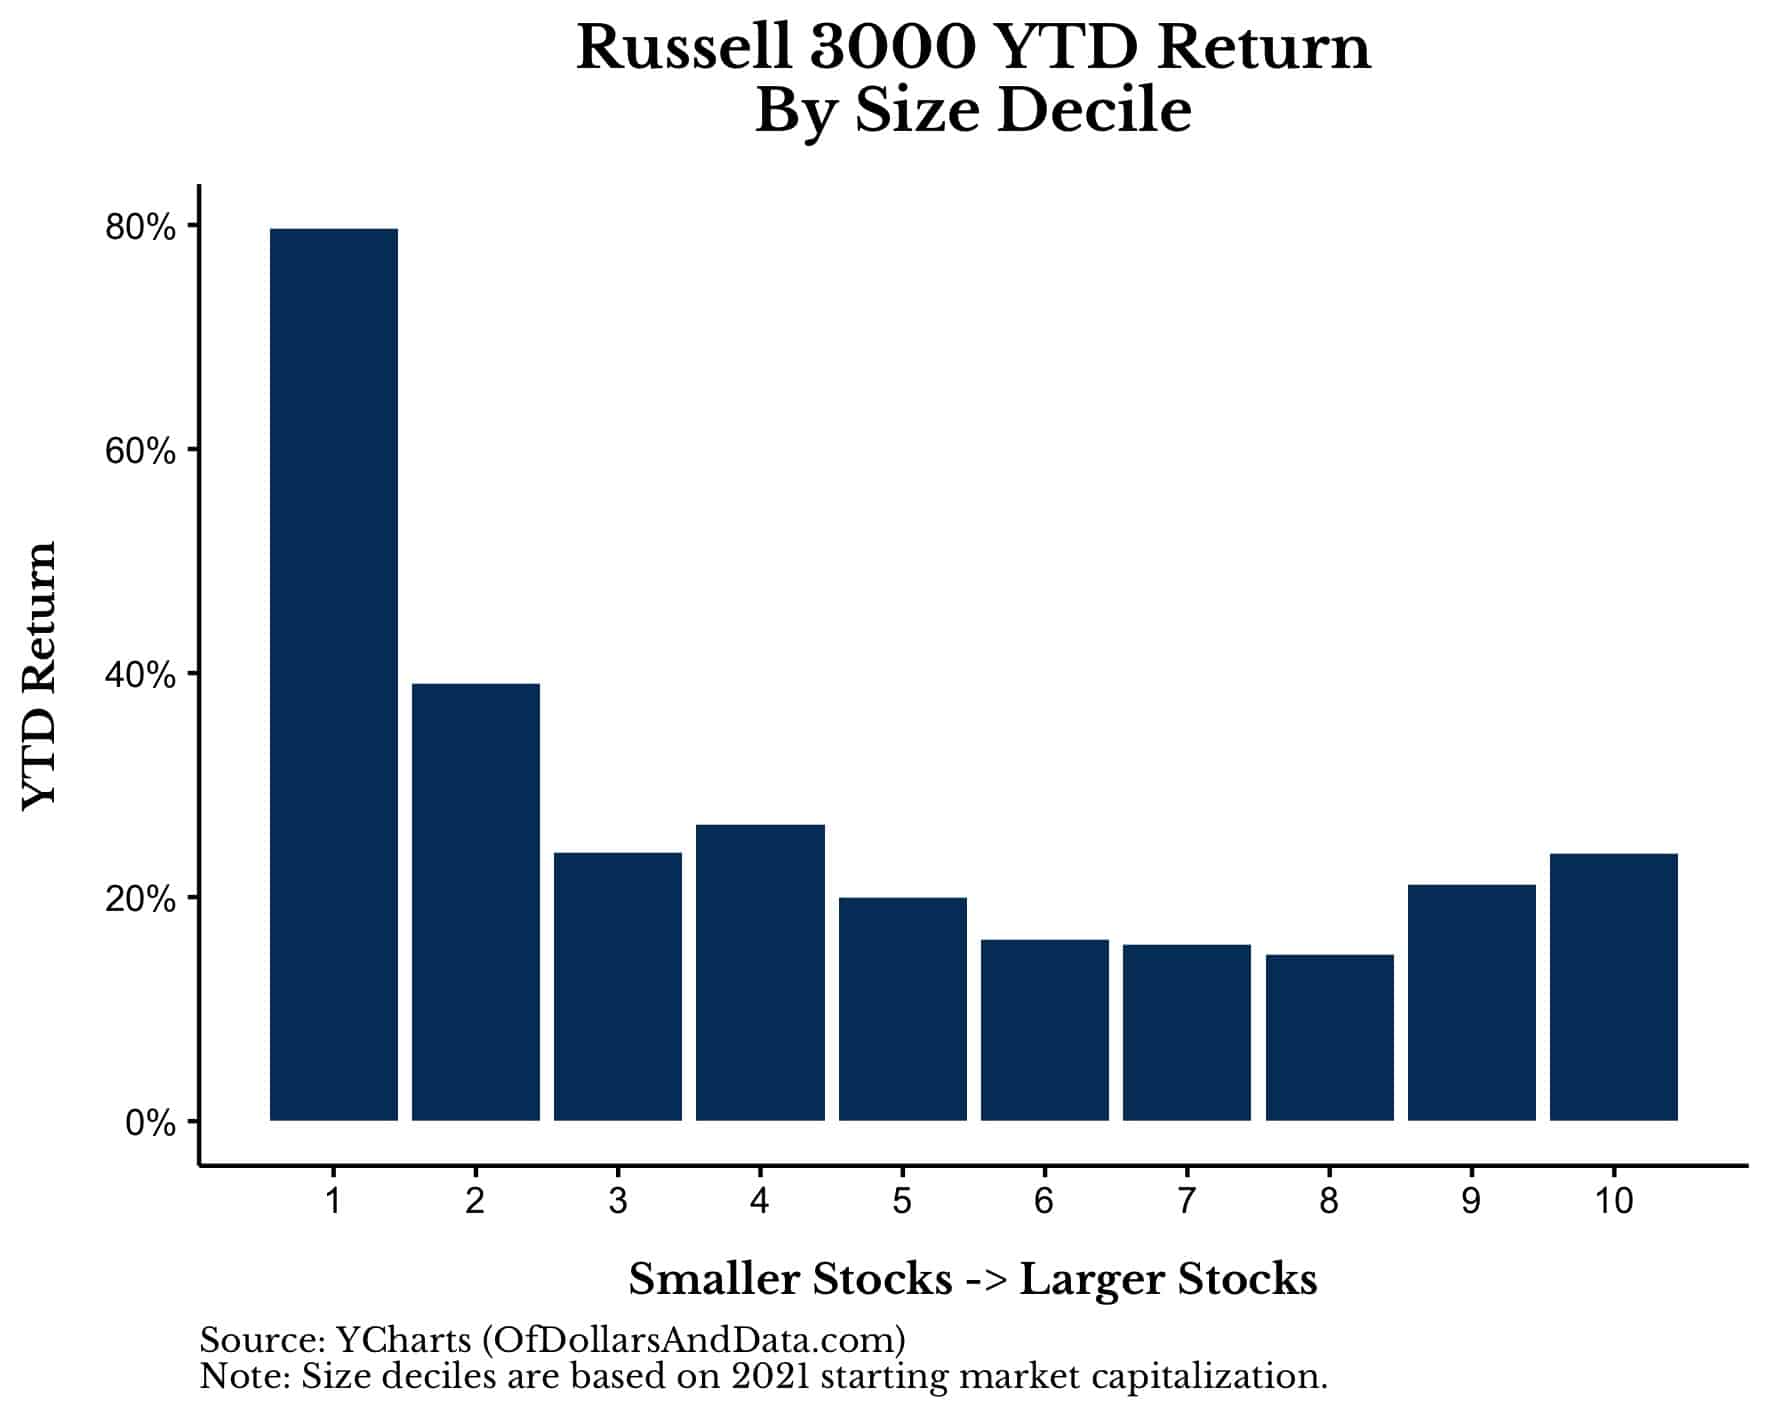 Russell 3000 YTD return by size decile in 2021